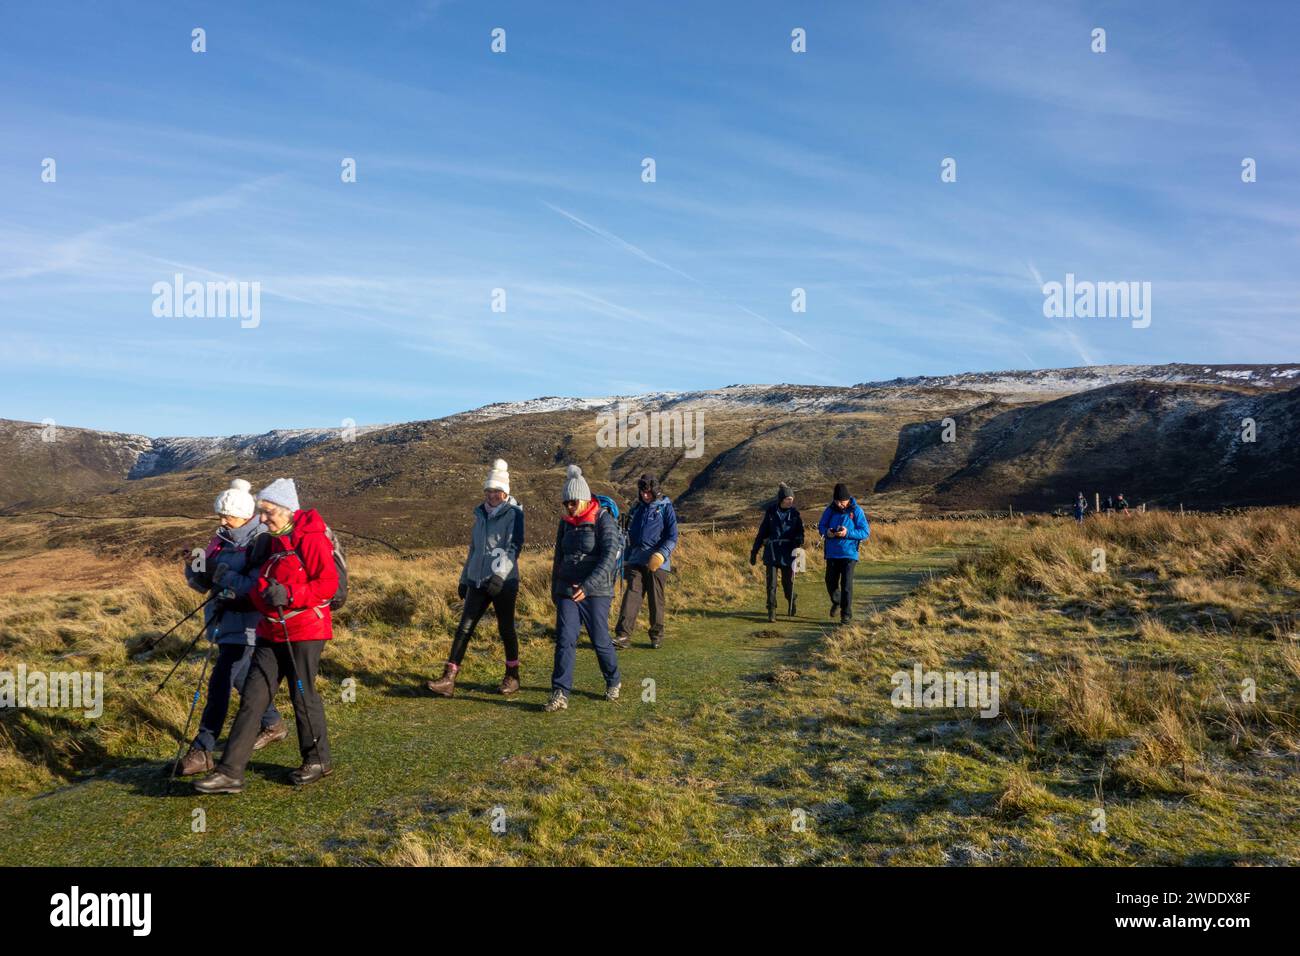 Members of the Sandbach U3A long walking group enjoying rambling in the Peak District hills above the Derbyshire town Hayfield England on Kinder Low Stock Photo